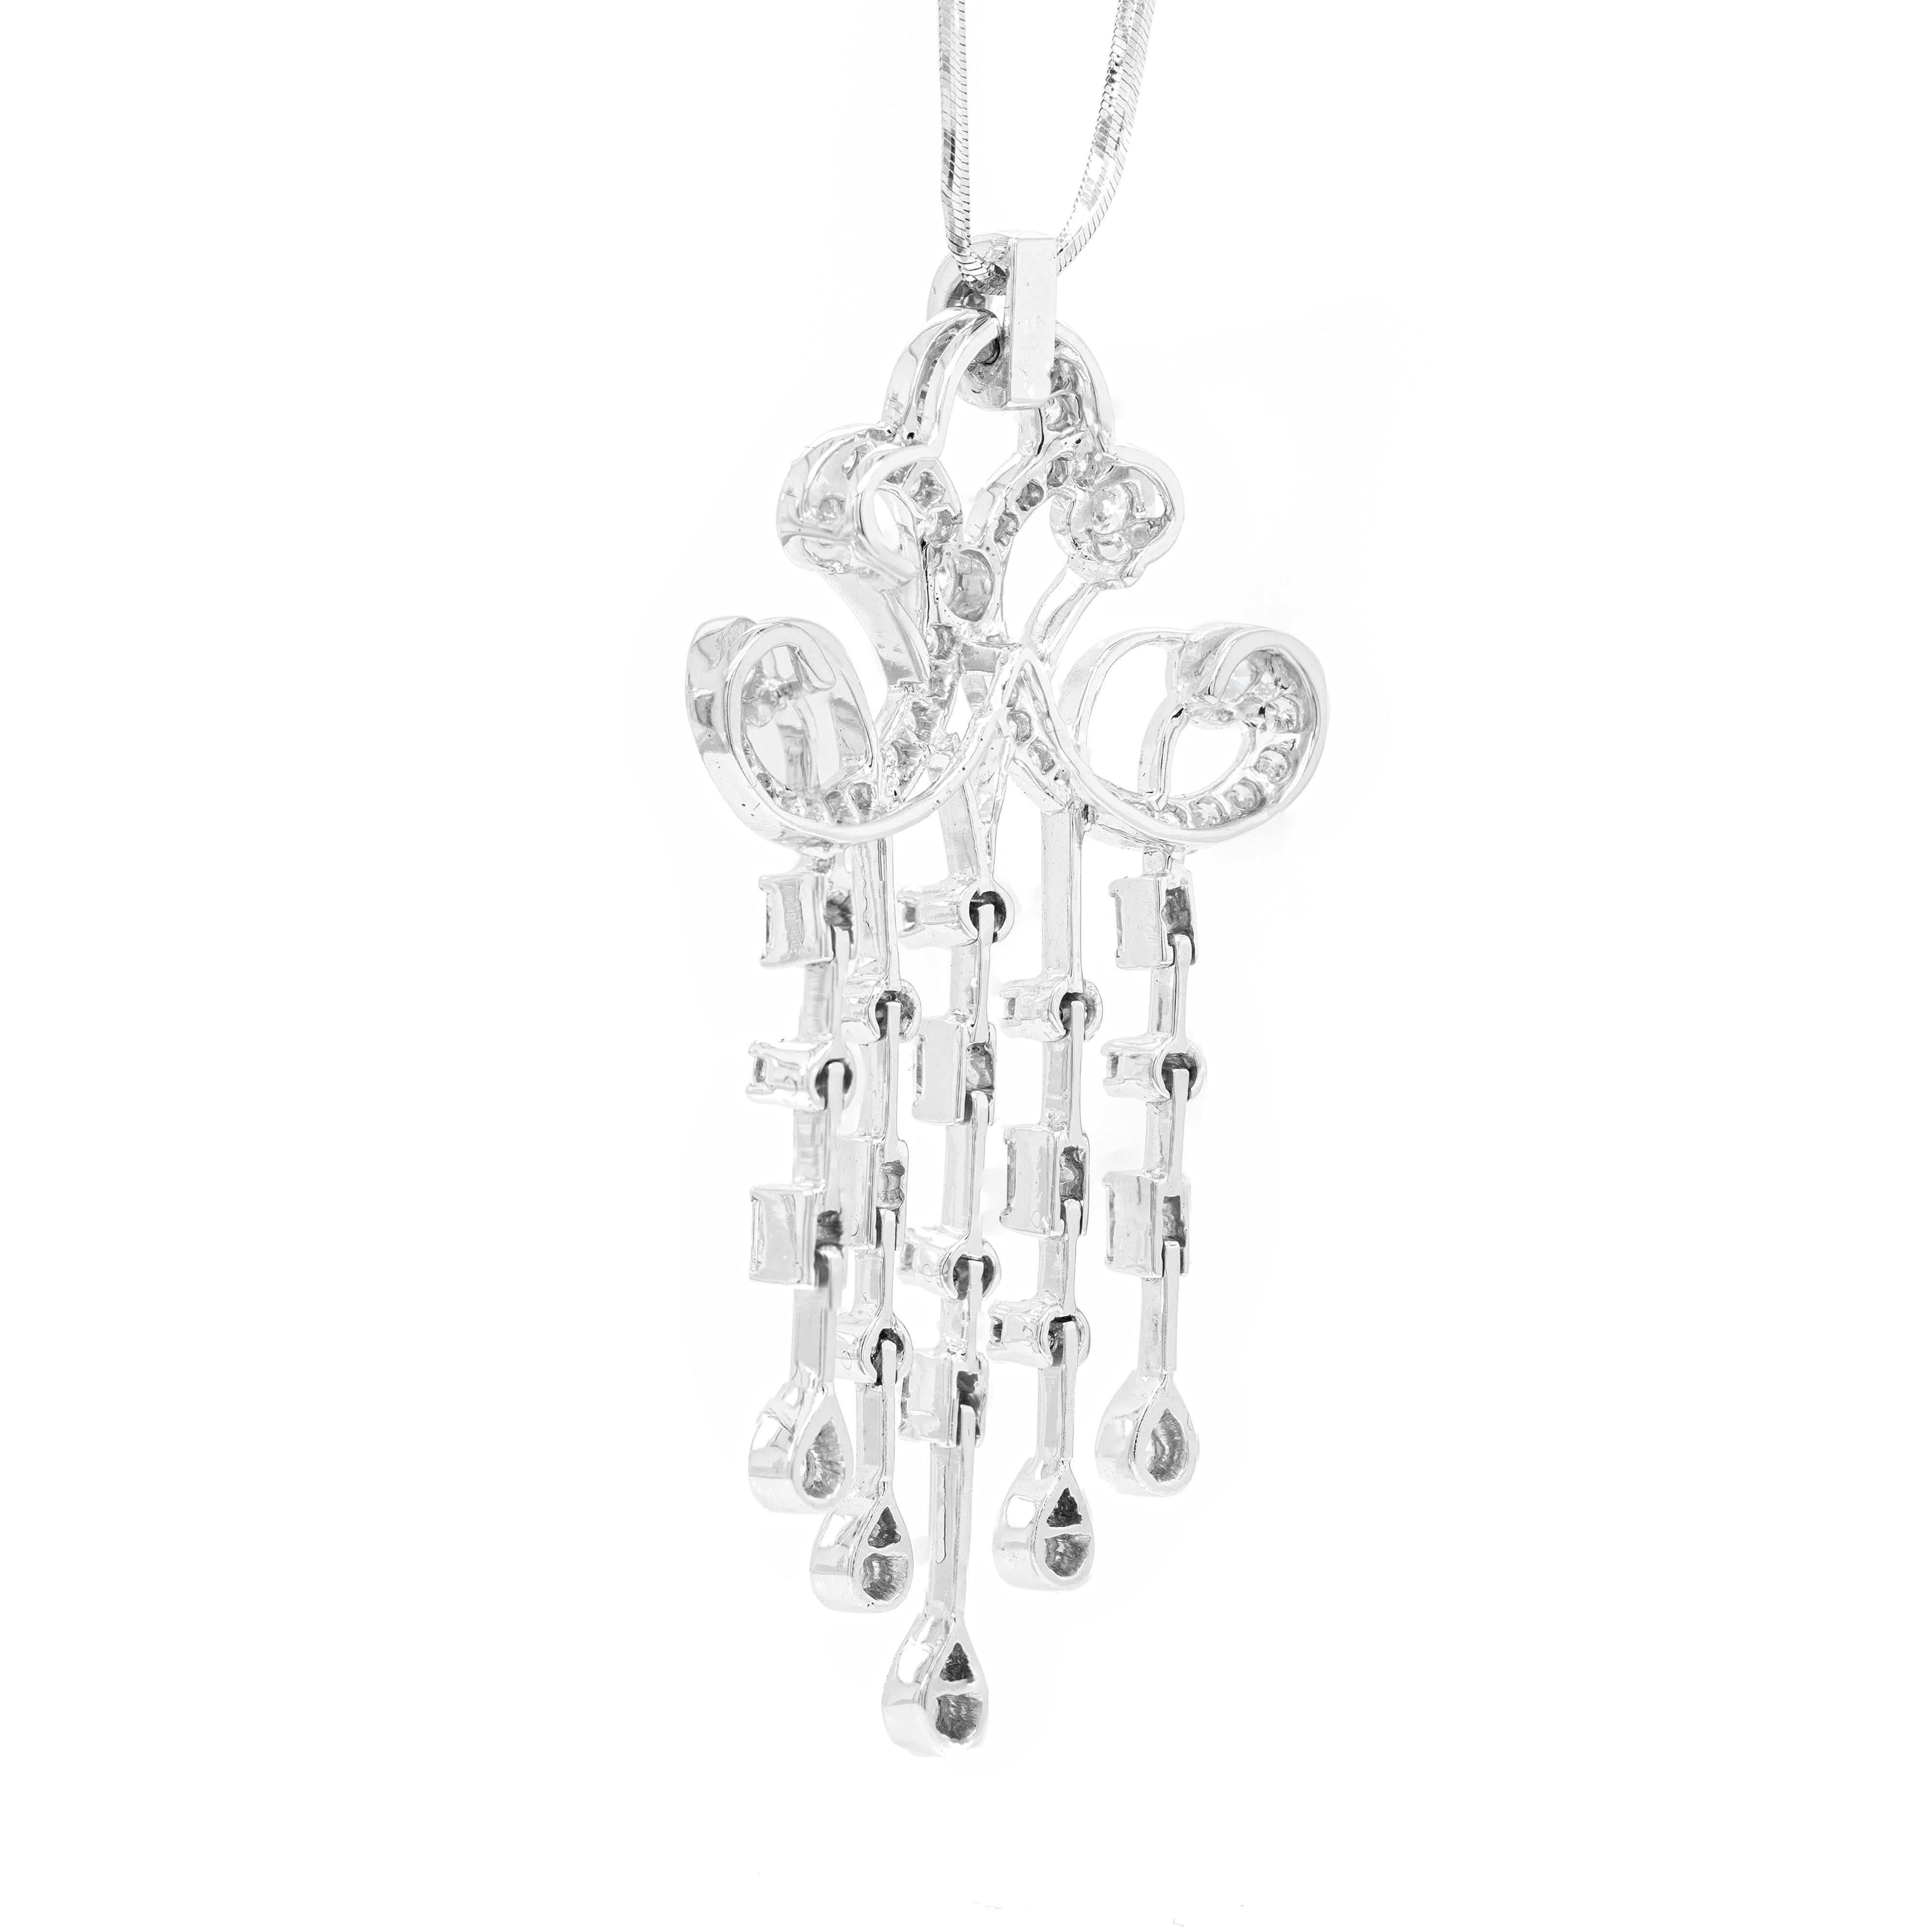 This wonderful chandelier necklace is crafted from 18 carat white gold and features an intricate and graceful design. The pendant's base, composed from elegant curved shapes, is beautifully inlaid with 59 round brilliant cut diamonds, all mounted in